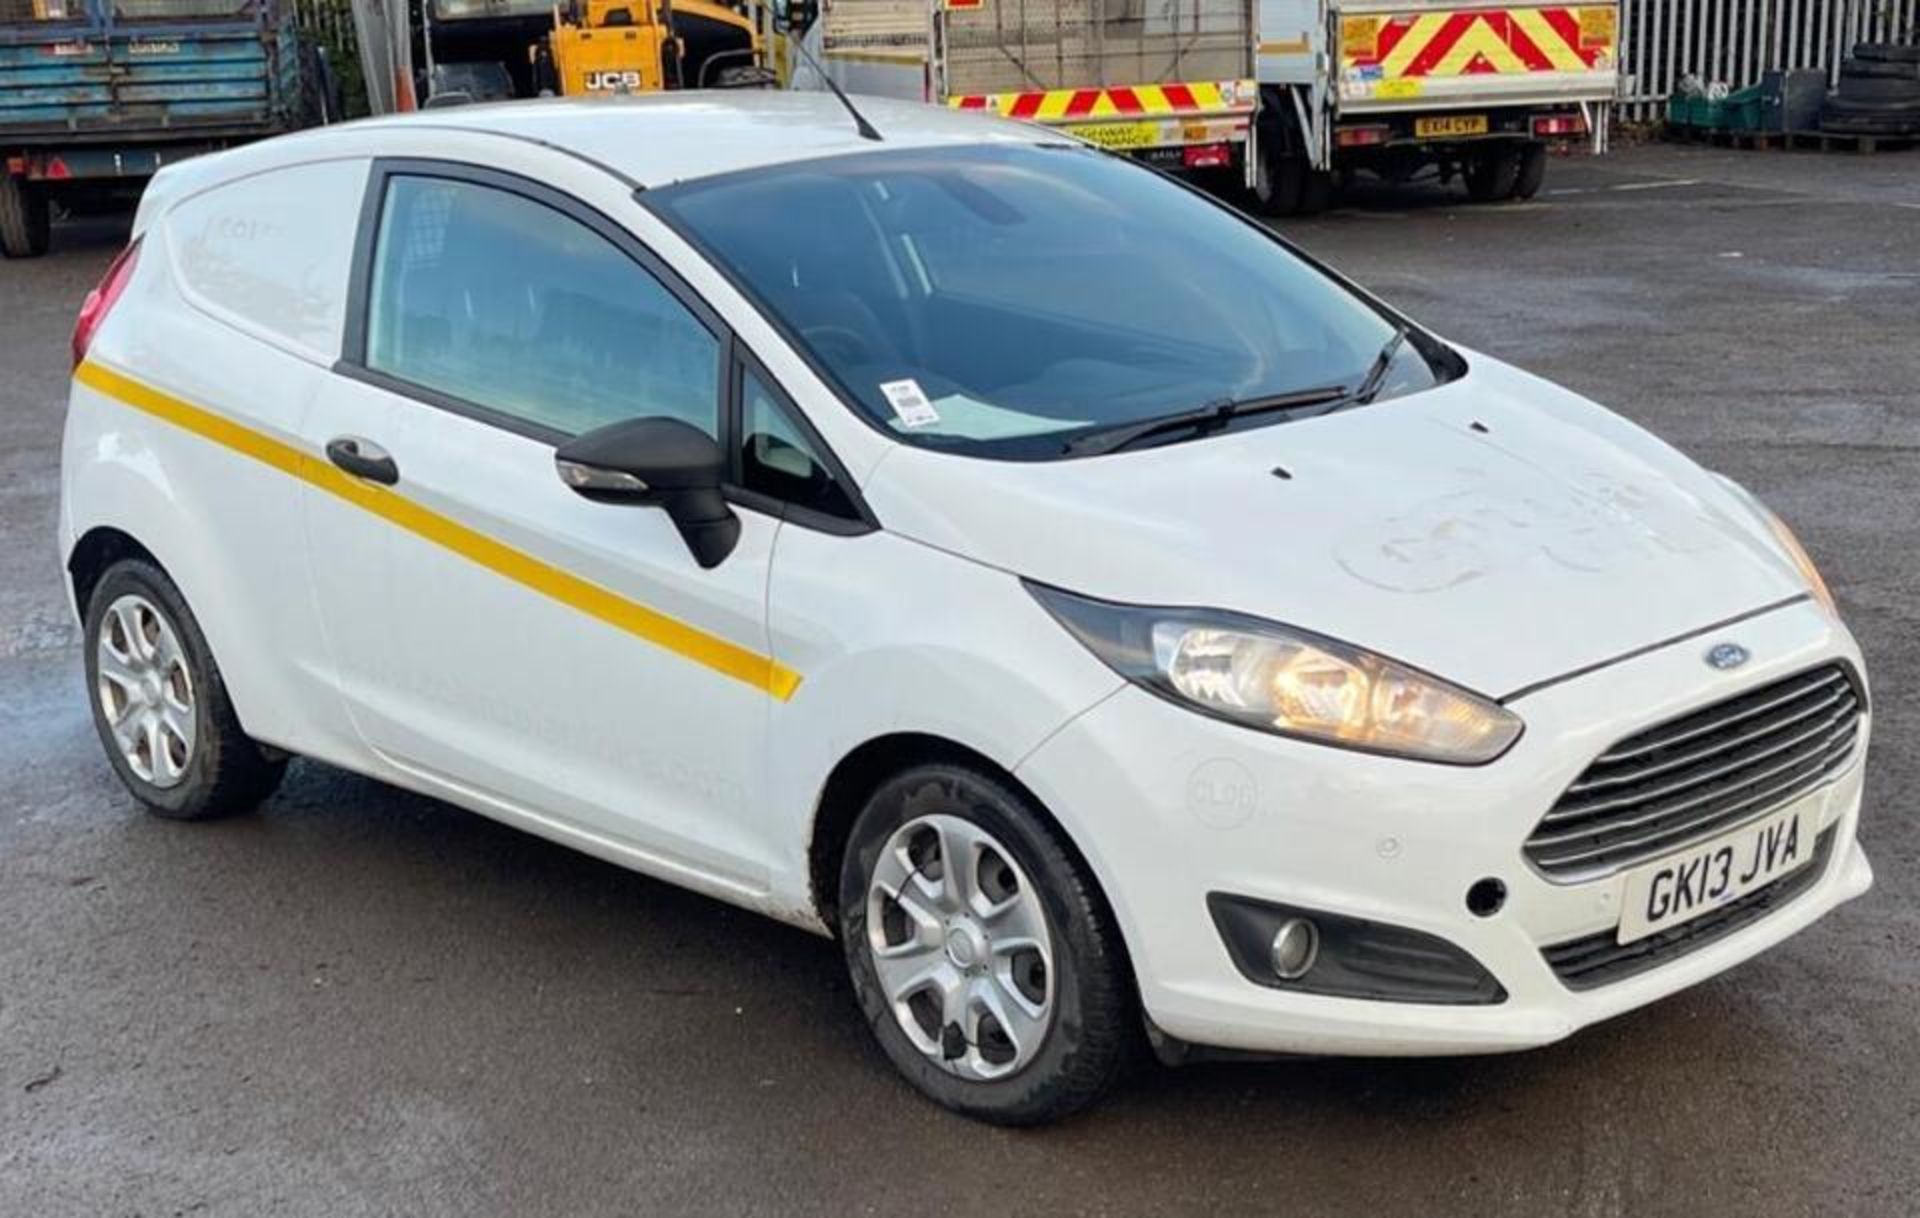 2013 FORD FIESTA VAN TDCI - LOW MILEAGE, LOADED WITH FEATURES! - Image 10 of 11